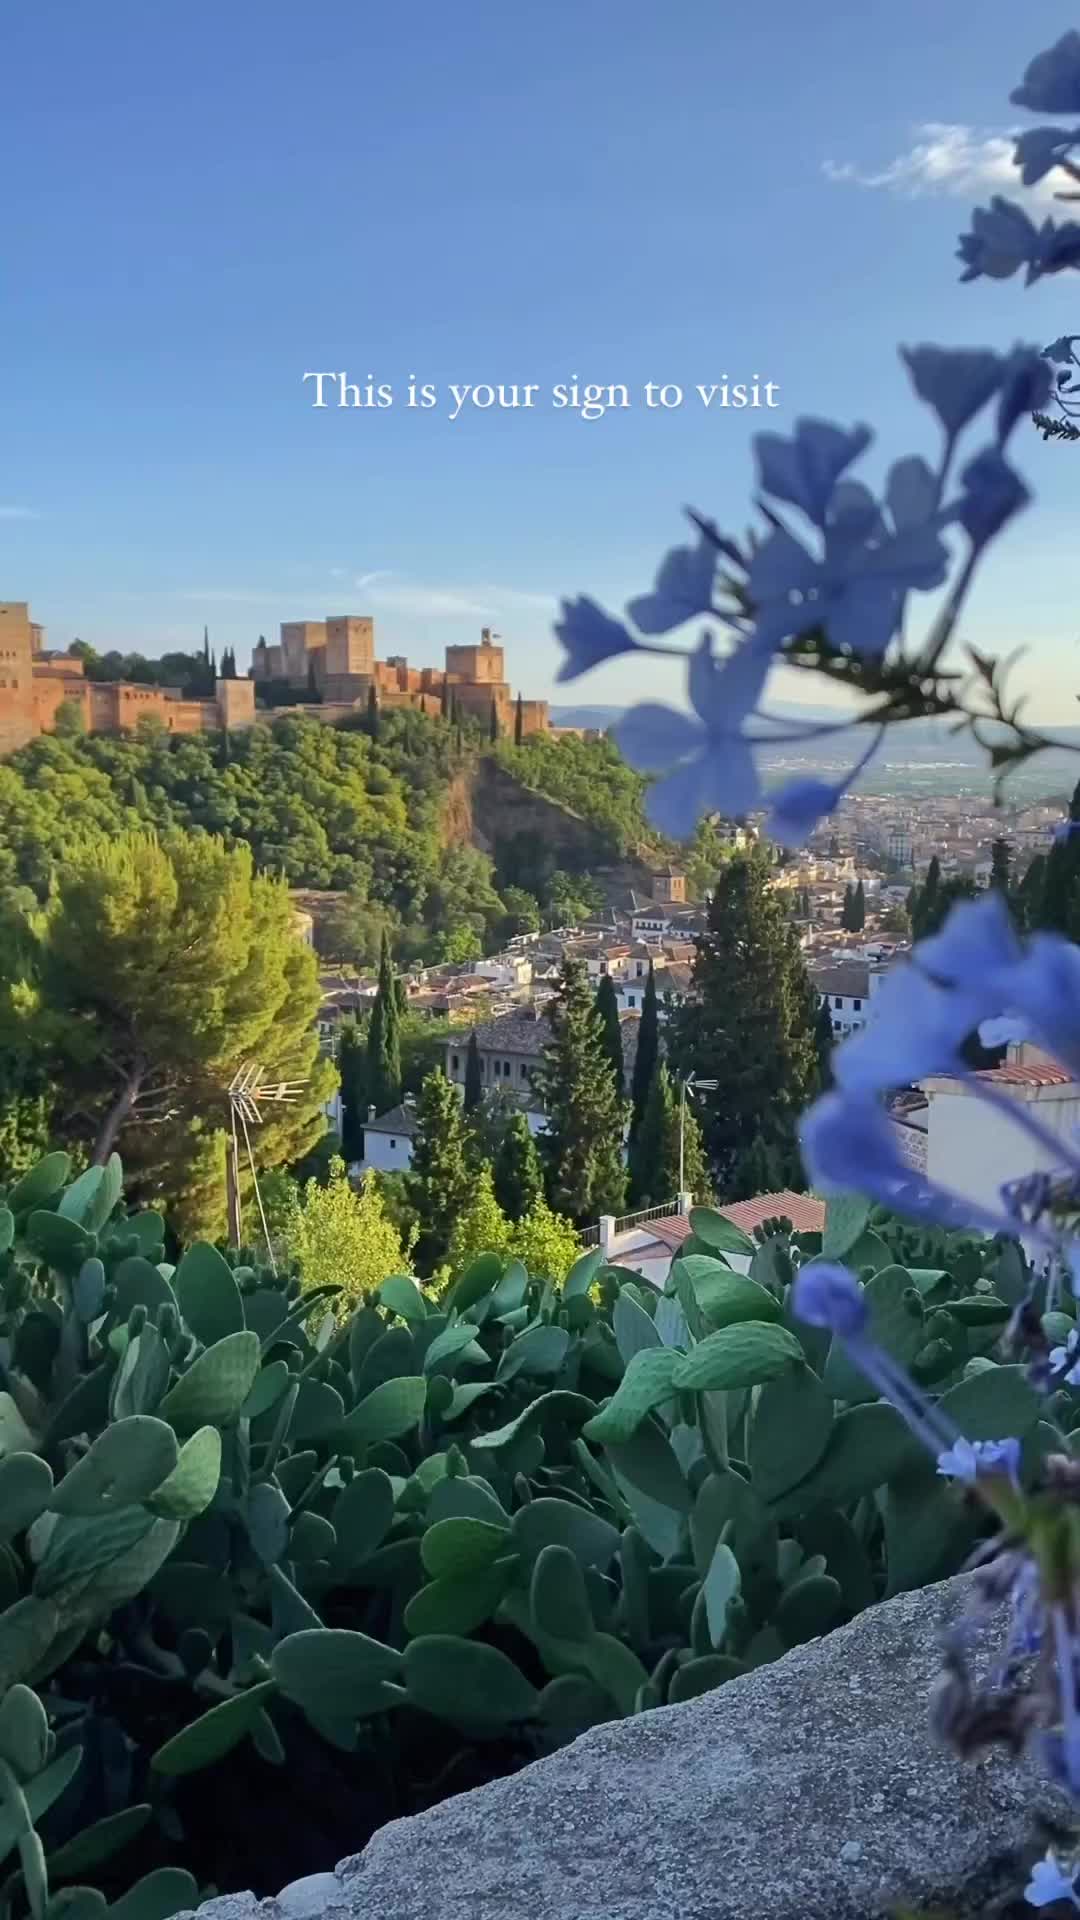 Follow @senses_of_spain for my new series of mini-guides on Granada for beginners 🇪🇸 (aka everything I wish I’d known before visiting!)

✅ Where to watch the sunset (and where NOT to…)
✅ Tips for visiting the Alhambra
✅ Tapas bars you can’t miss

And lots more! Coming 🔜 

#granada #granadaturismo💜 #granadaspain #viveandalucia